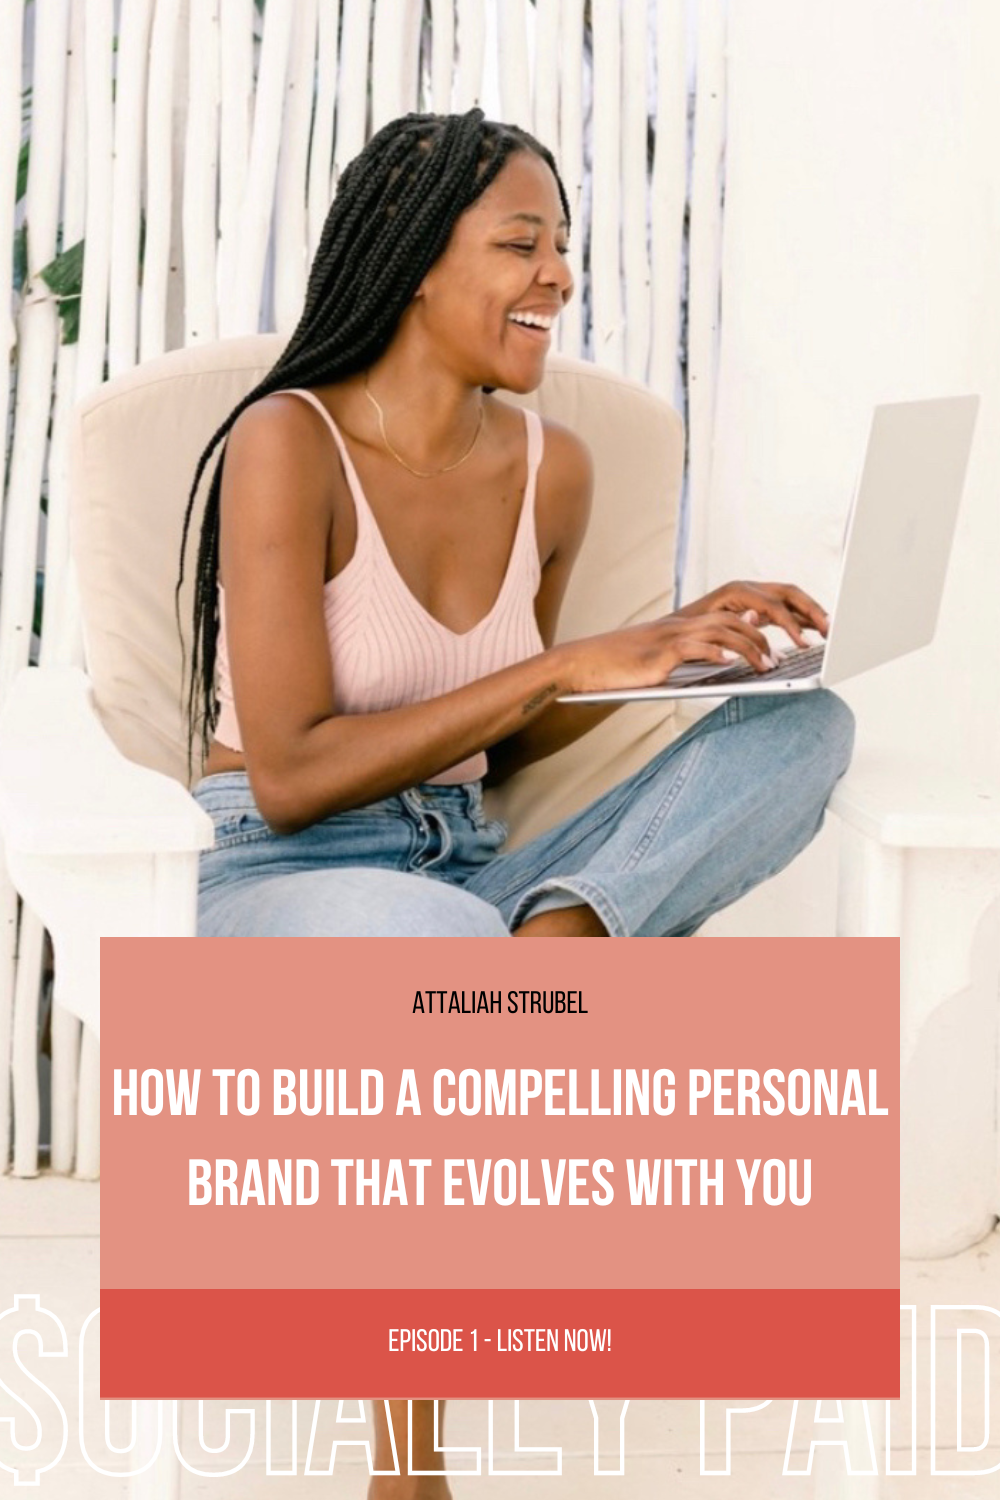 How to Build a Compelling Personal Brand That Evolves With You